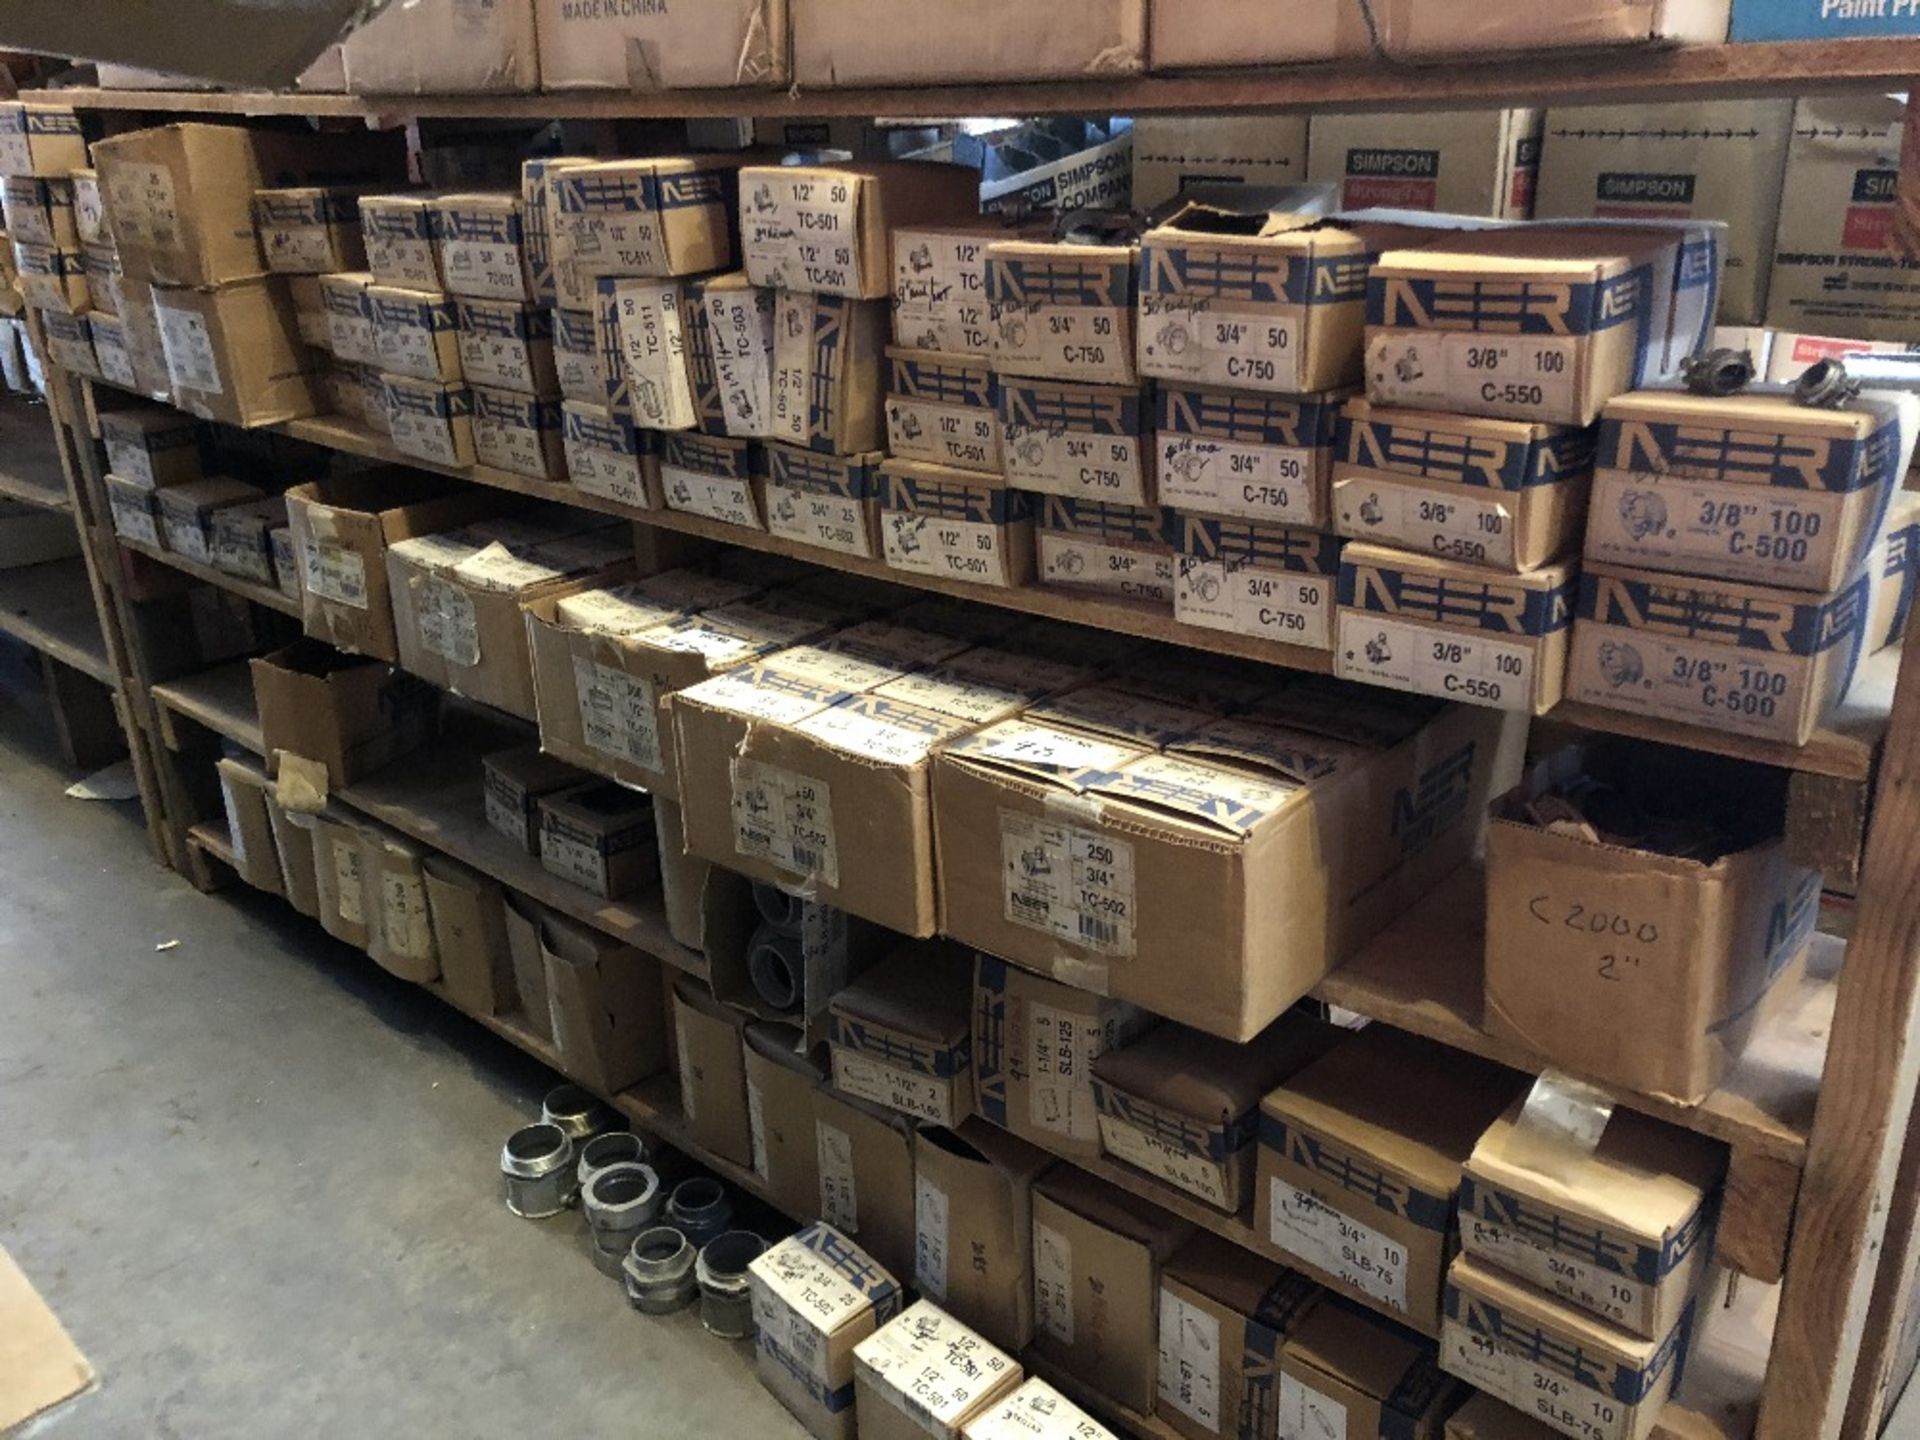 BREAKER BOXES, ROOF DRAINS, OUTLET BOX COVERS, SWITCH BOXES, MISCELLANEOUS FITTINGS